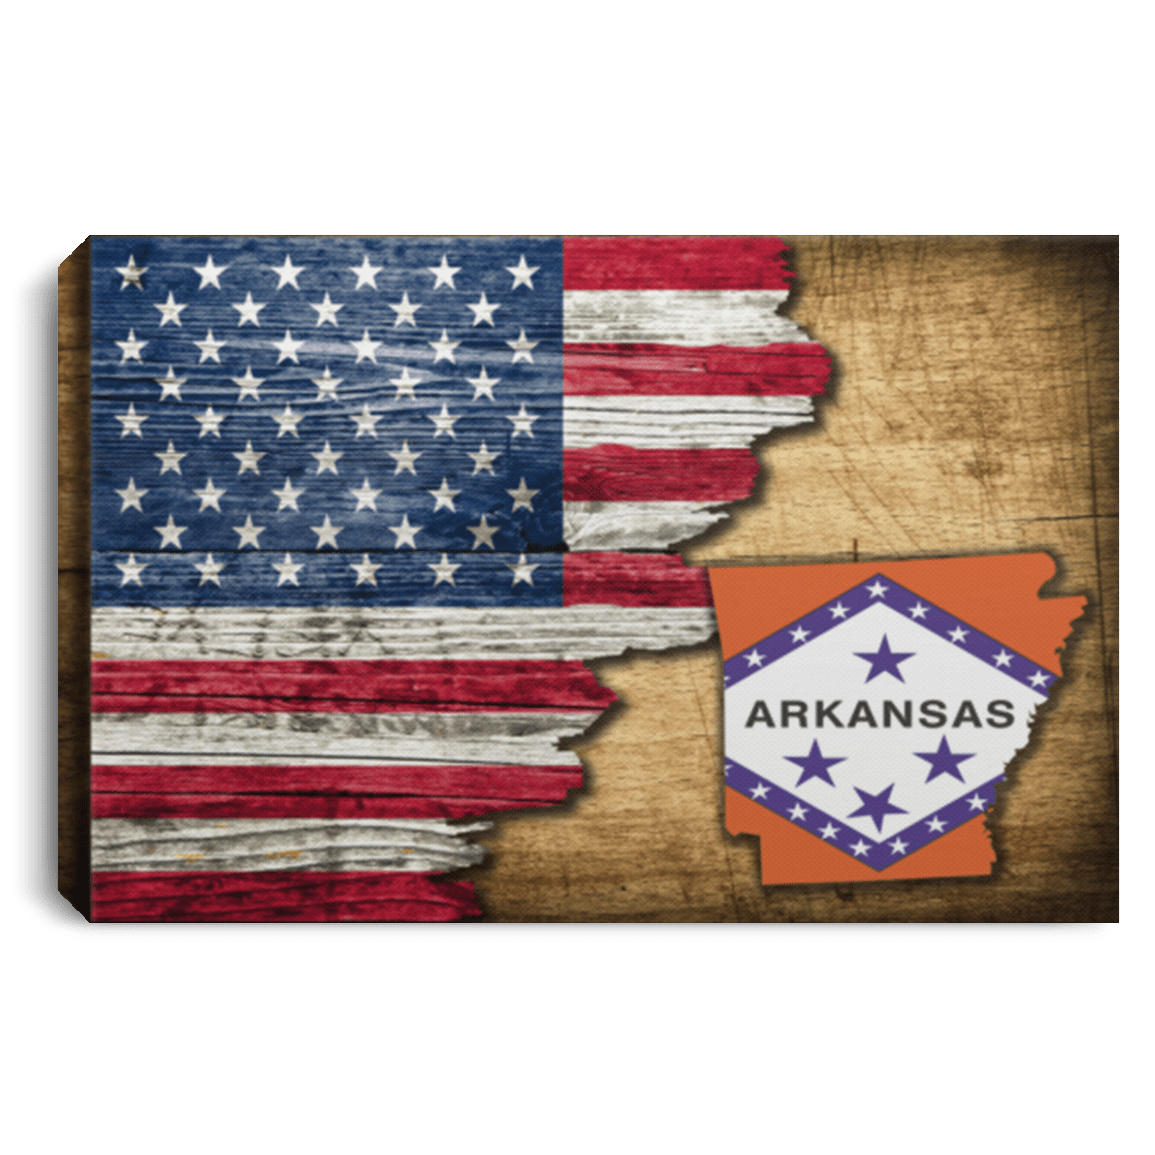 United States/Arkansas Flag Ripped Effect 12X8 Inches Landscape Canvas .75In Frame